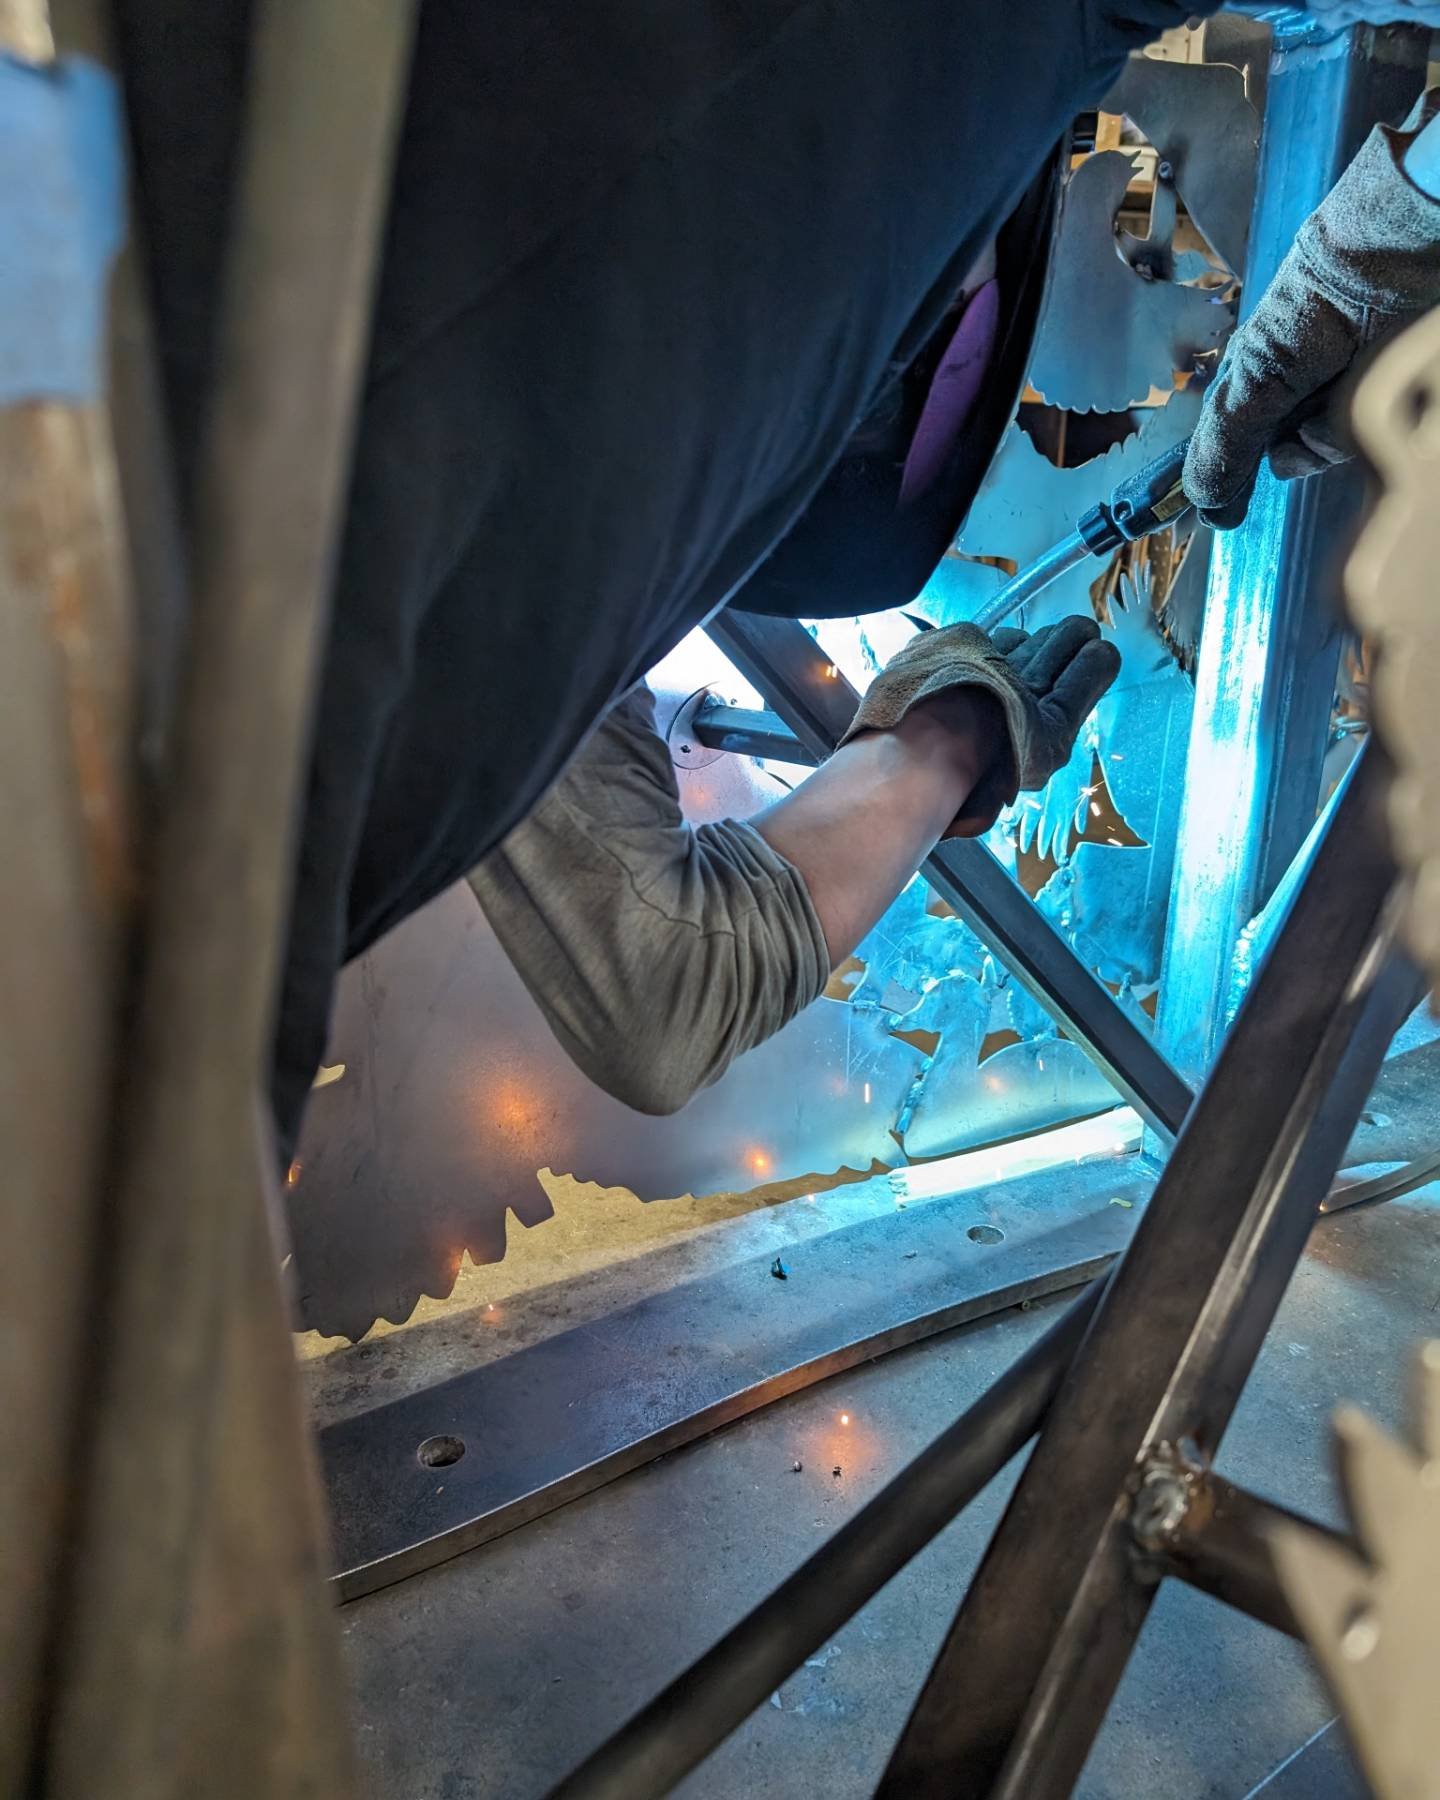 Check out these cool close up shots of Tyler welding on the stems for our current project: CONVOCATION!

#mga #mgasculpture #mgasculpturestudio #mgateam #sculpture #publicart #publicsculpture #art 

📷: @thenatureoffire